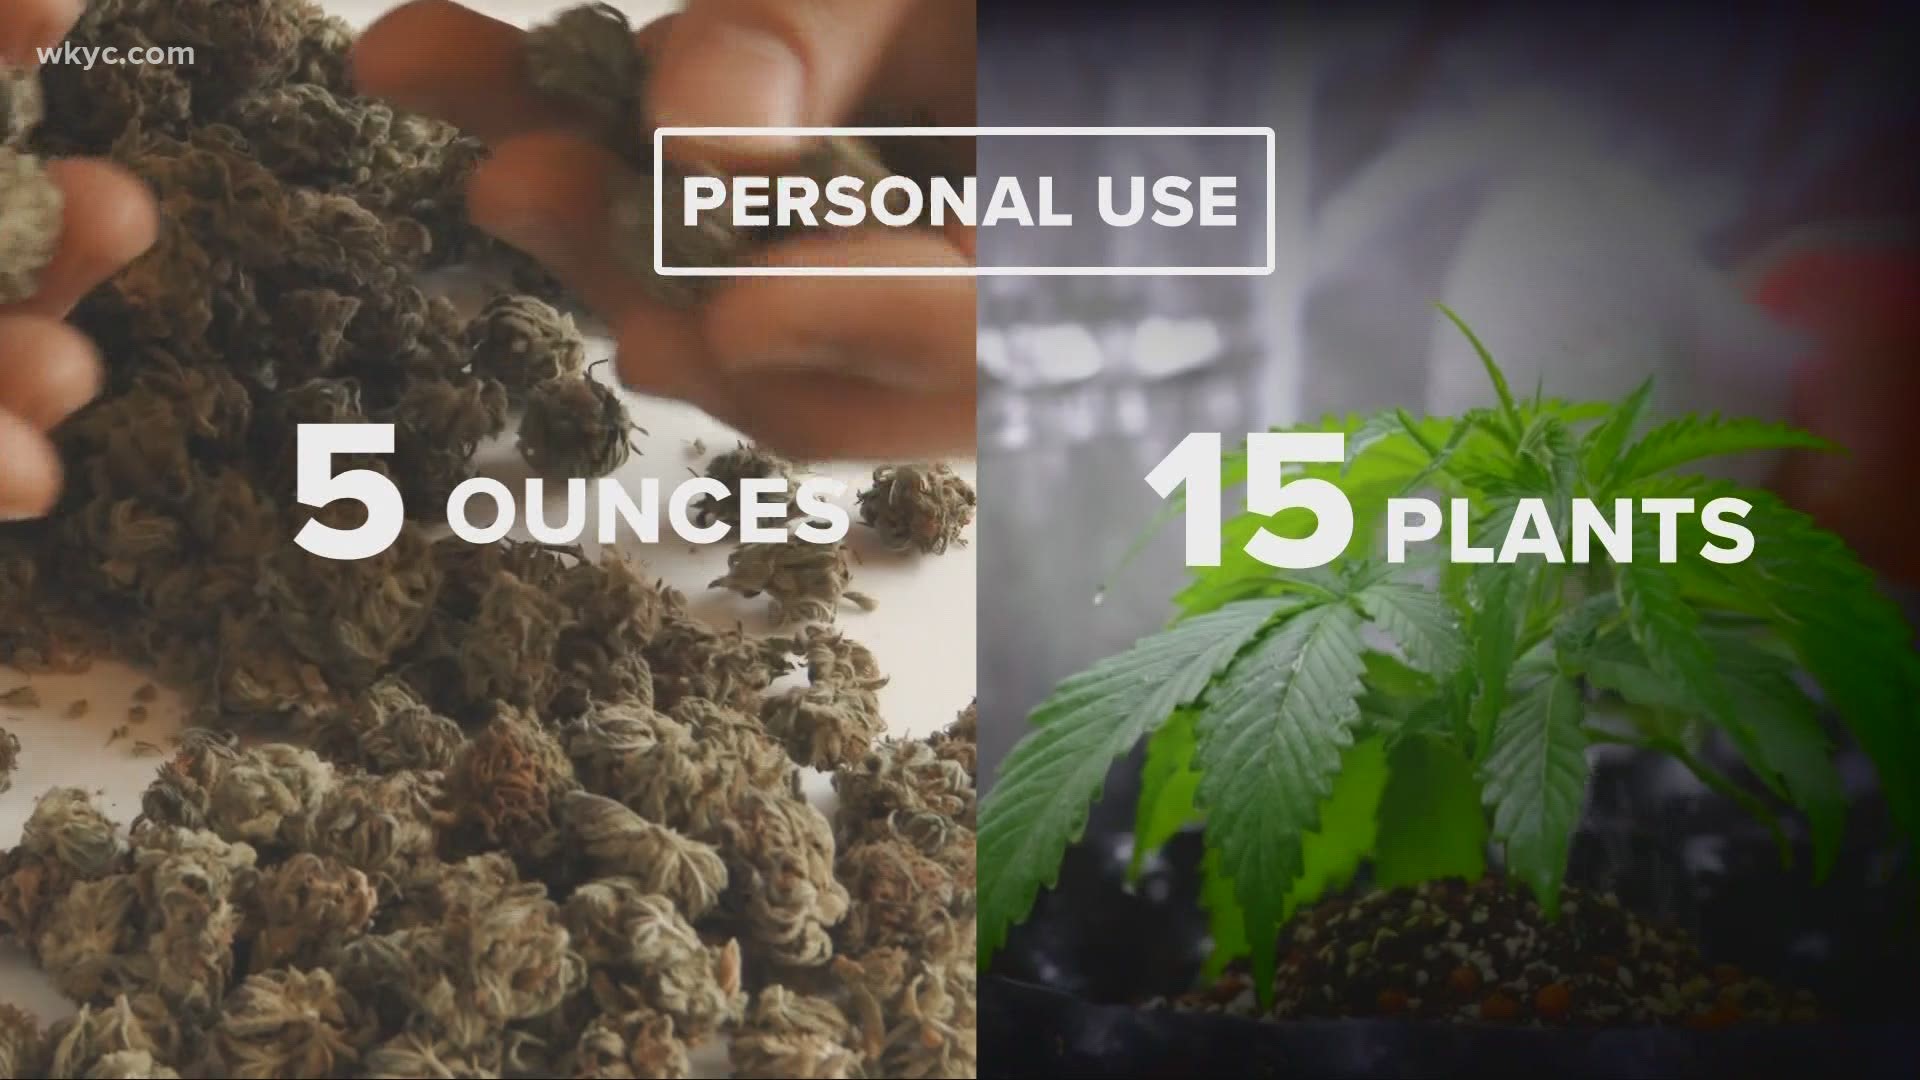 Some Democratic lawmakers are ready to make recreational marijuana use legal in Ohio. A bill is set to be introduced next week. Brandon Simmons has the details.